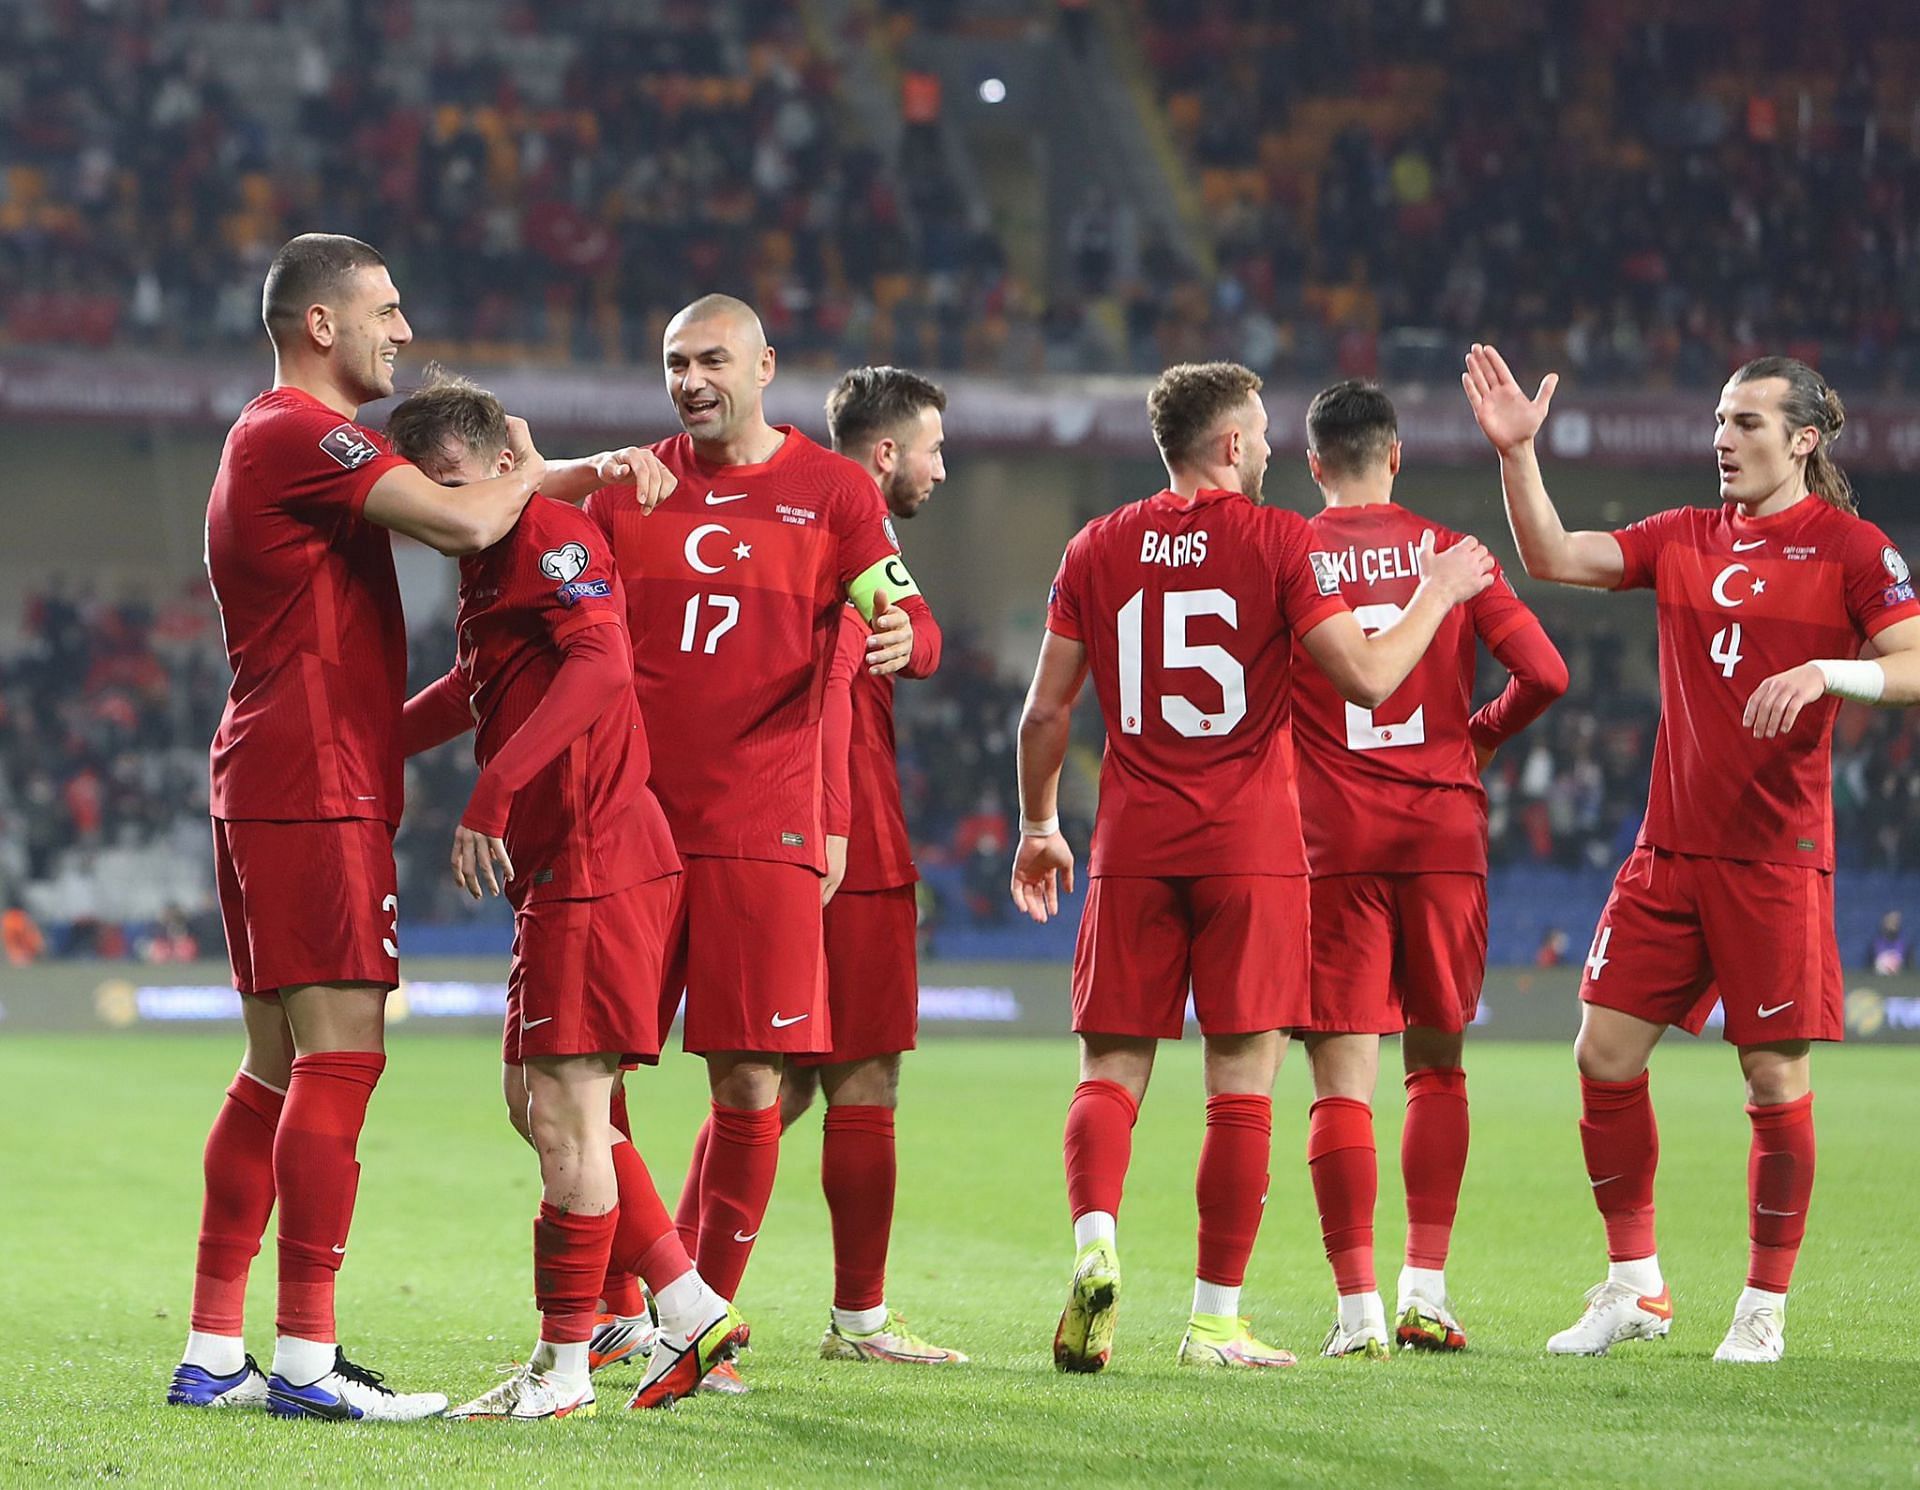 Turkey thrashed Glbraltar 6-0 in the World Cup qualifiers